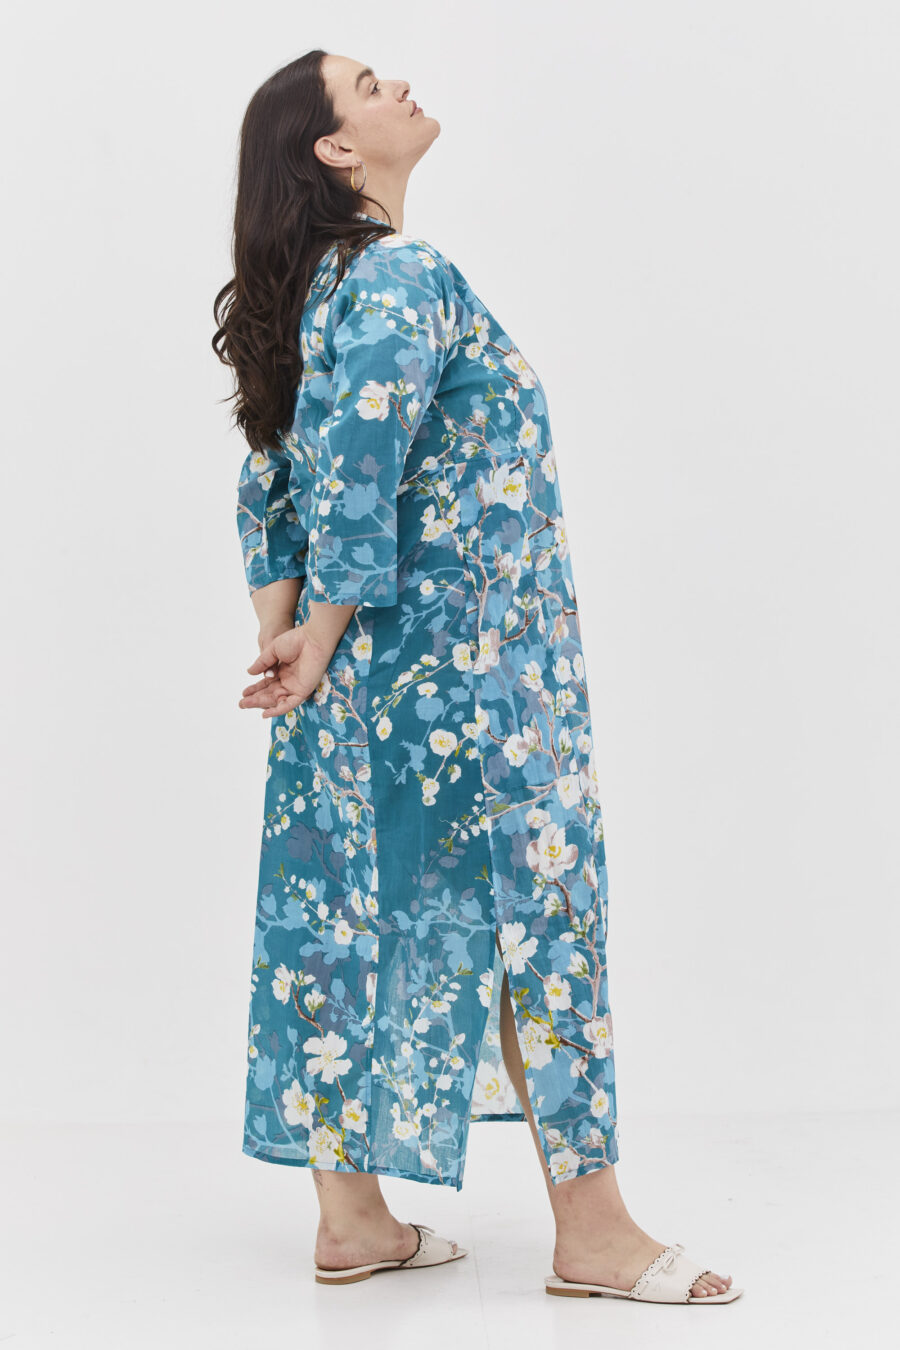 Jalabiya dress | Uniquely designed dress – Blossoming almond print on a blue background. Inspired by Vincent Van Gogh by comfort zone boutique